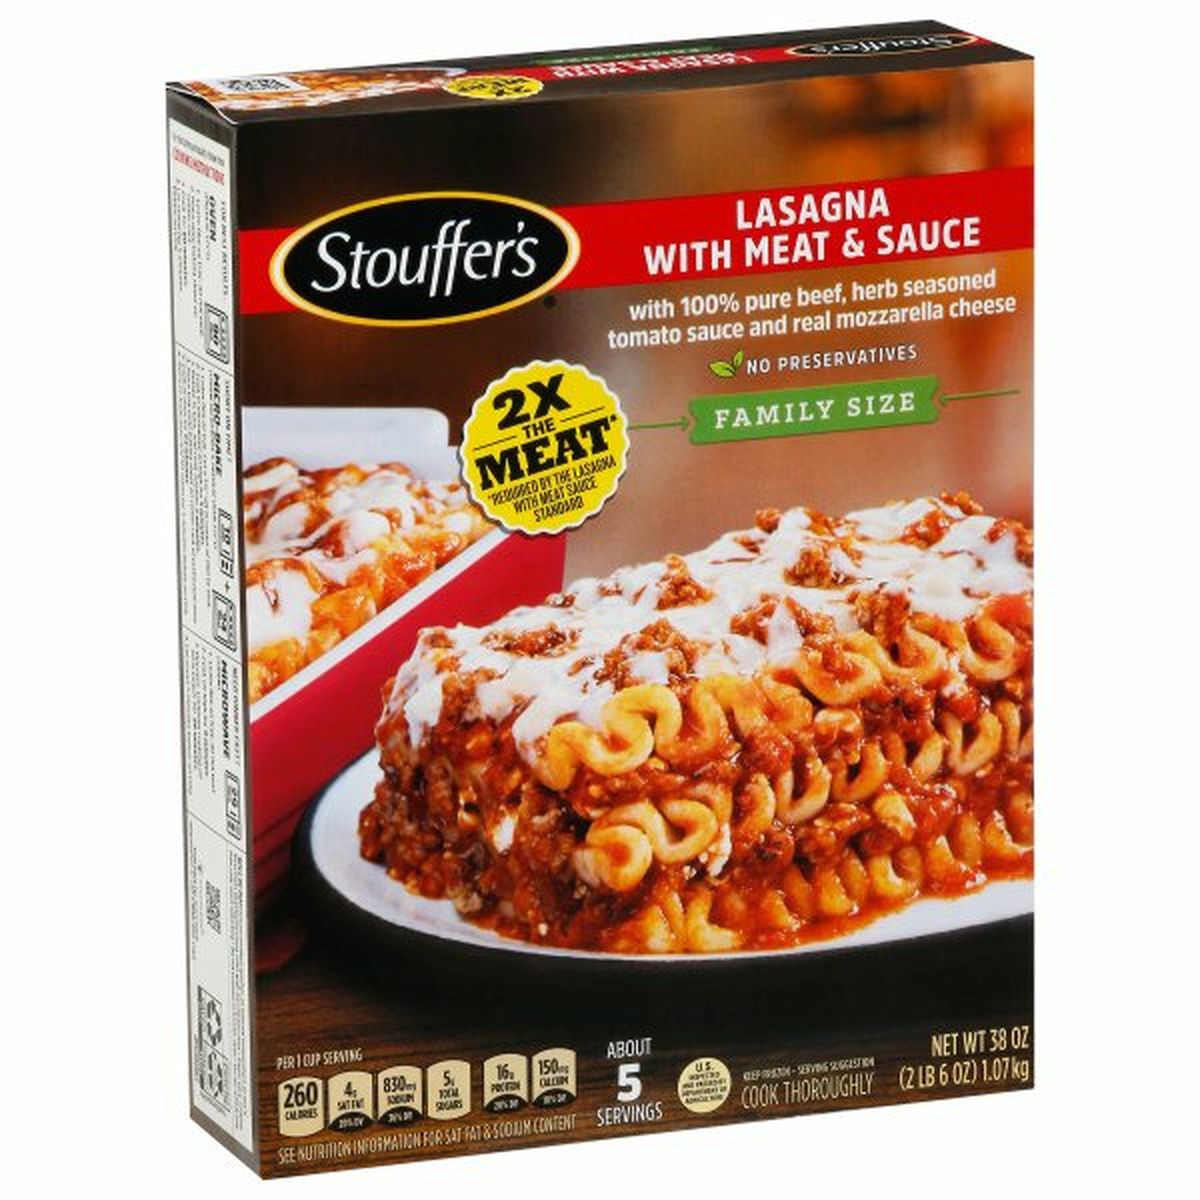 Calories in Stouffer's Lasagna with Meat Sauce, Family Size